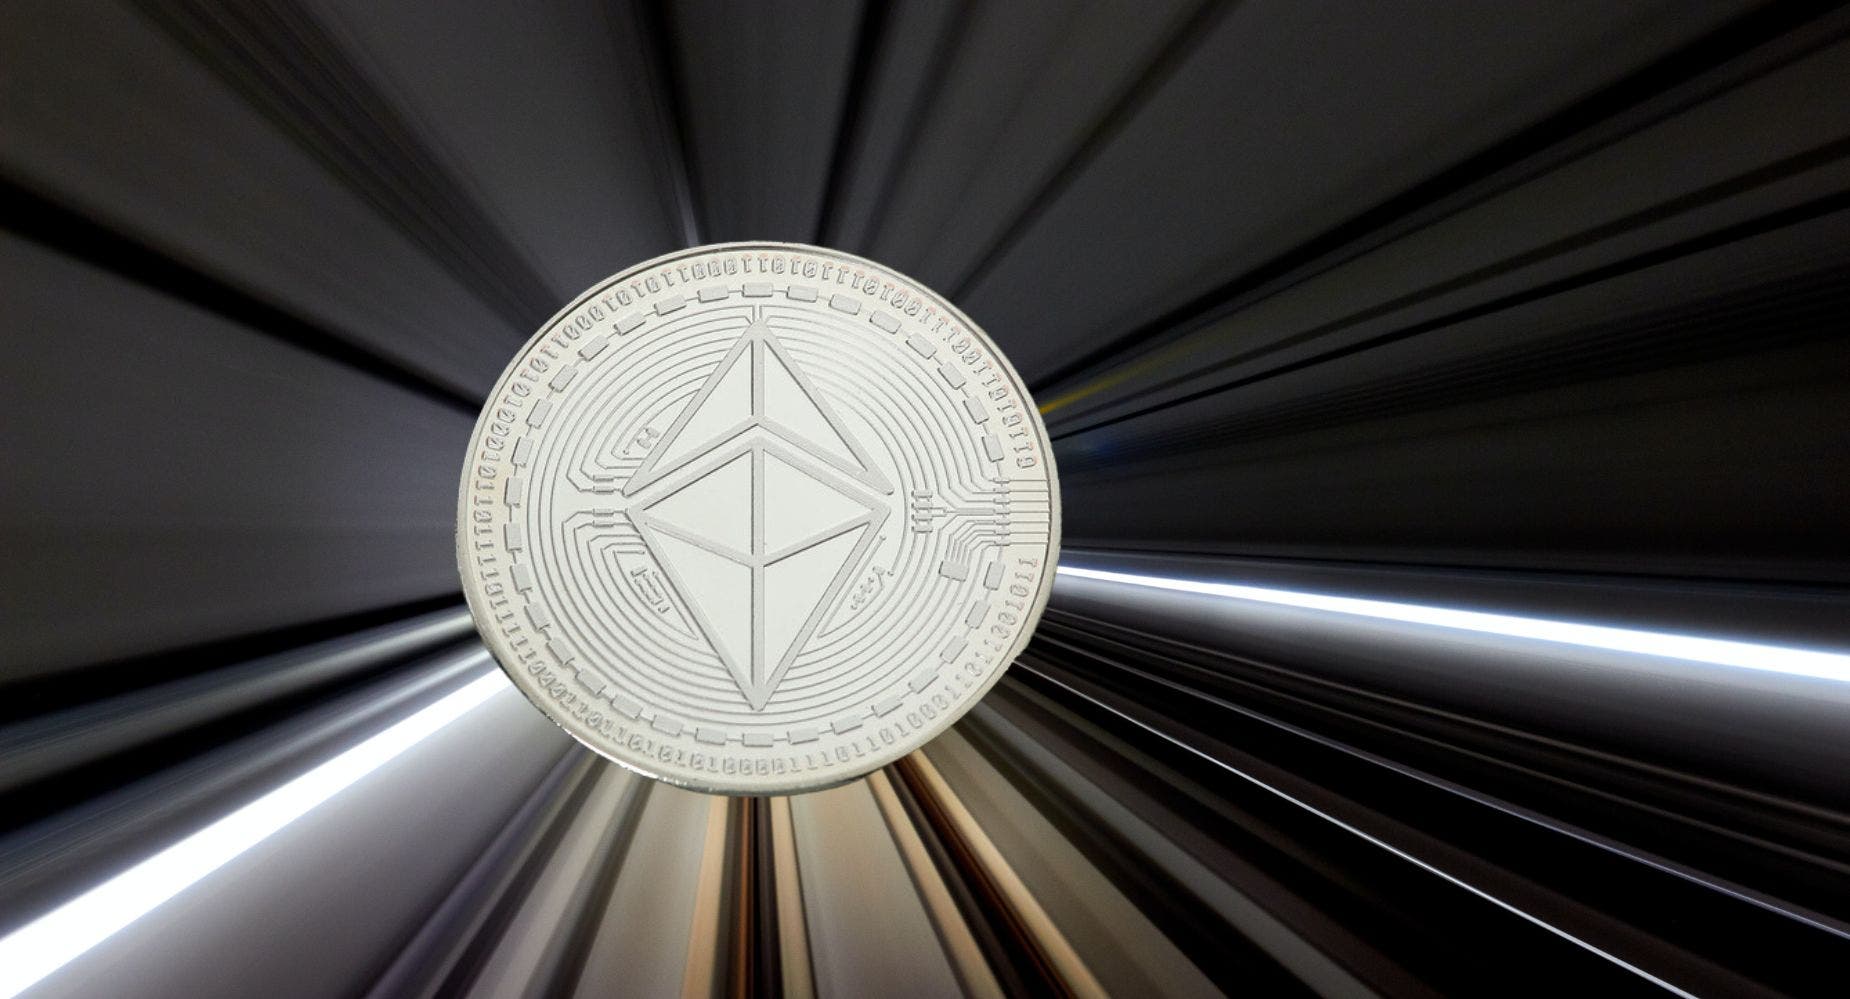 What To Watch On Ethereum's Chart As The Crypto Surges Higher